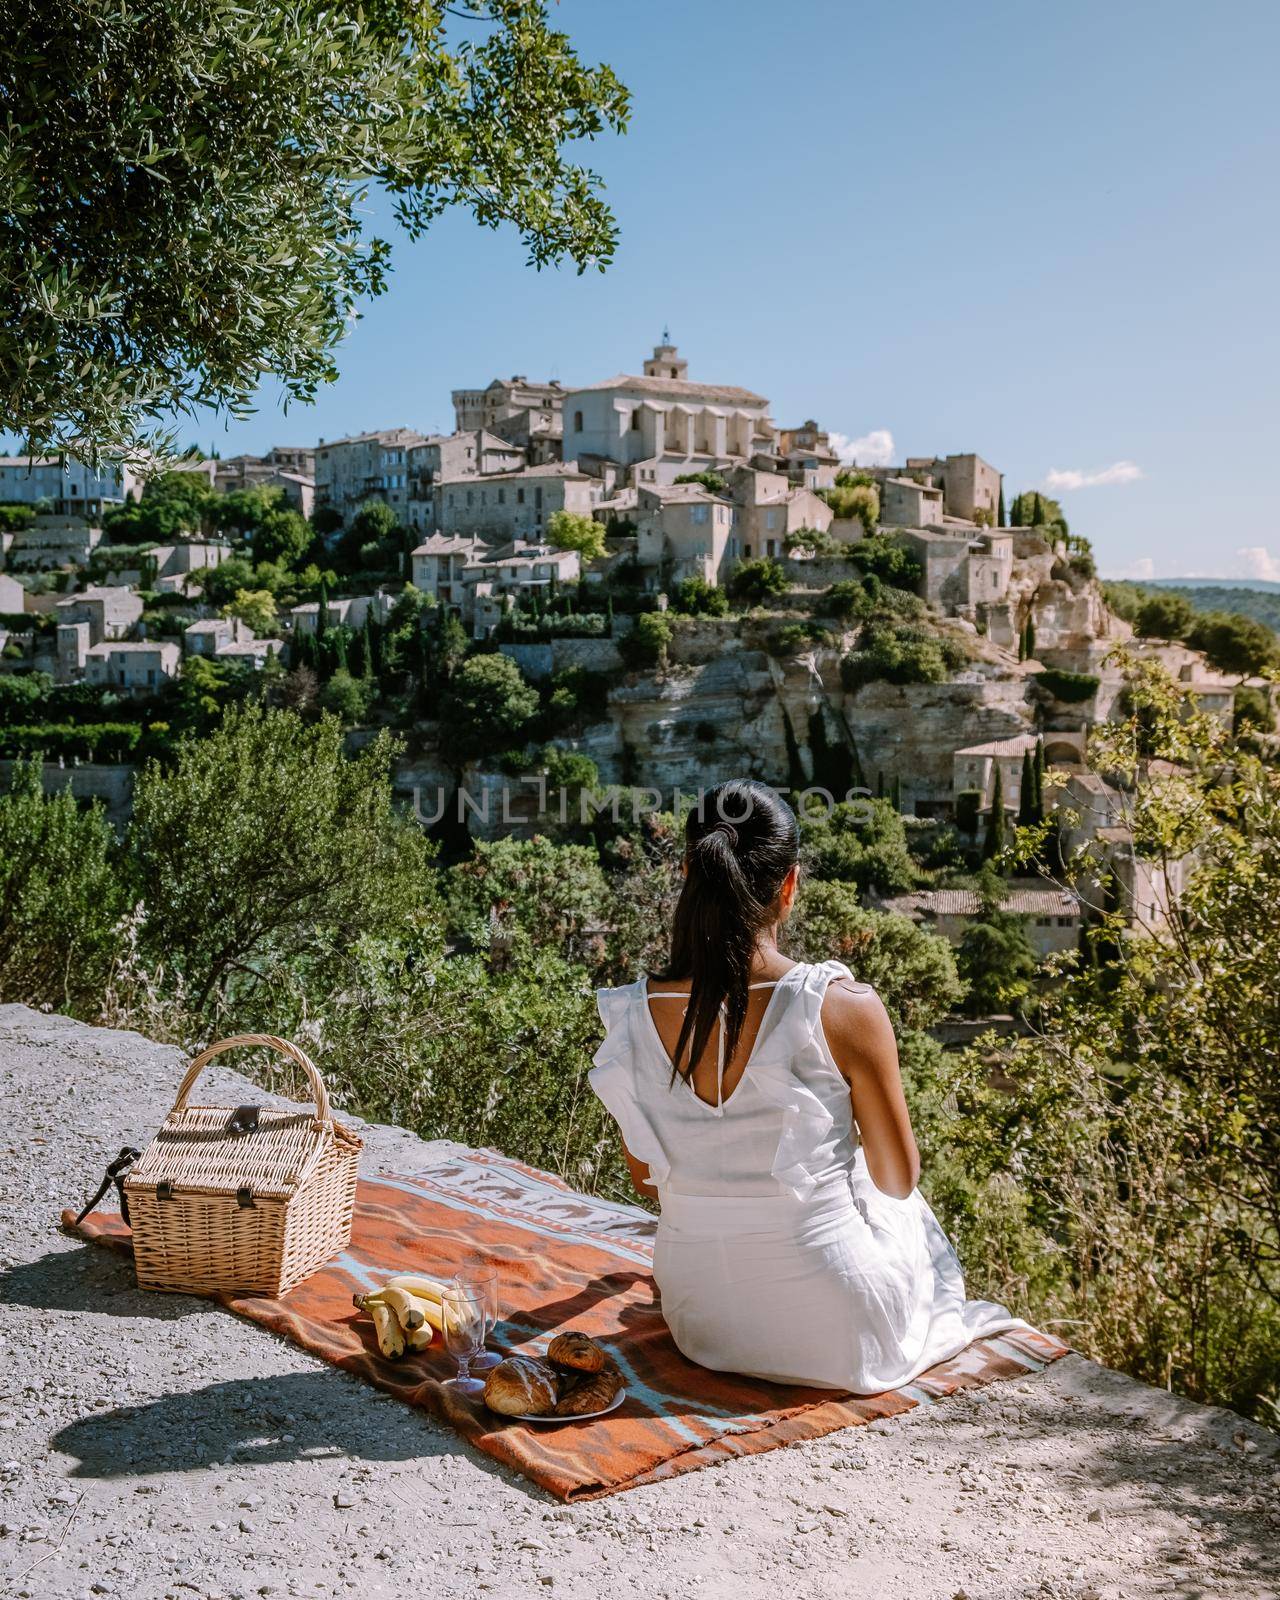 View of Gordes, a small medieval town in Provence, France. A view of the ledges of the roof of this beautiful village and landscape by fokkebok